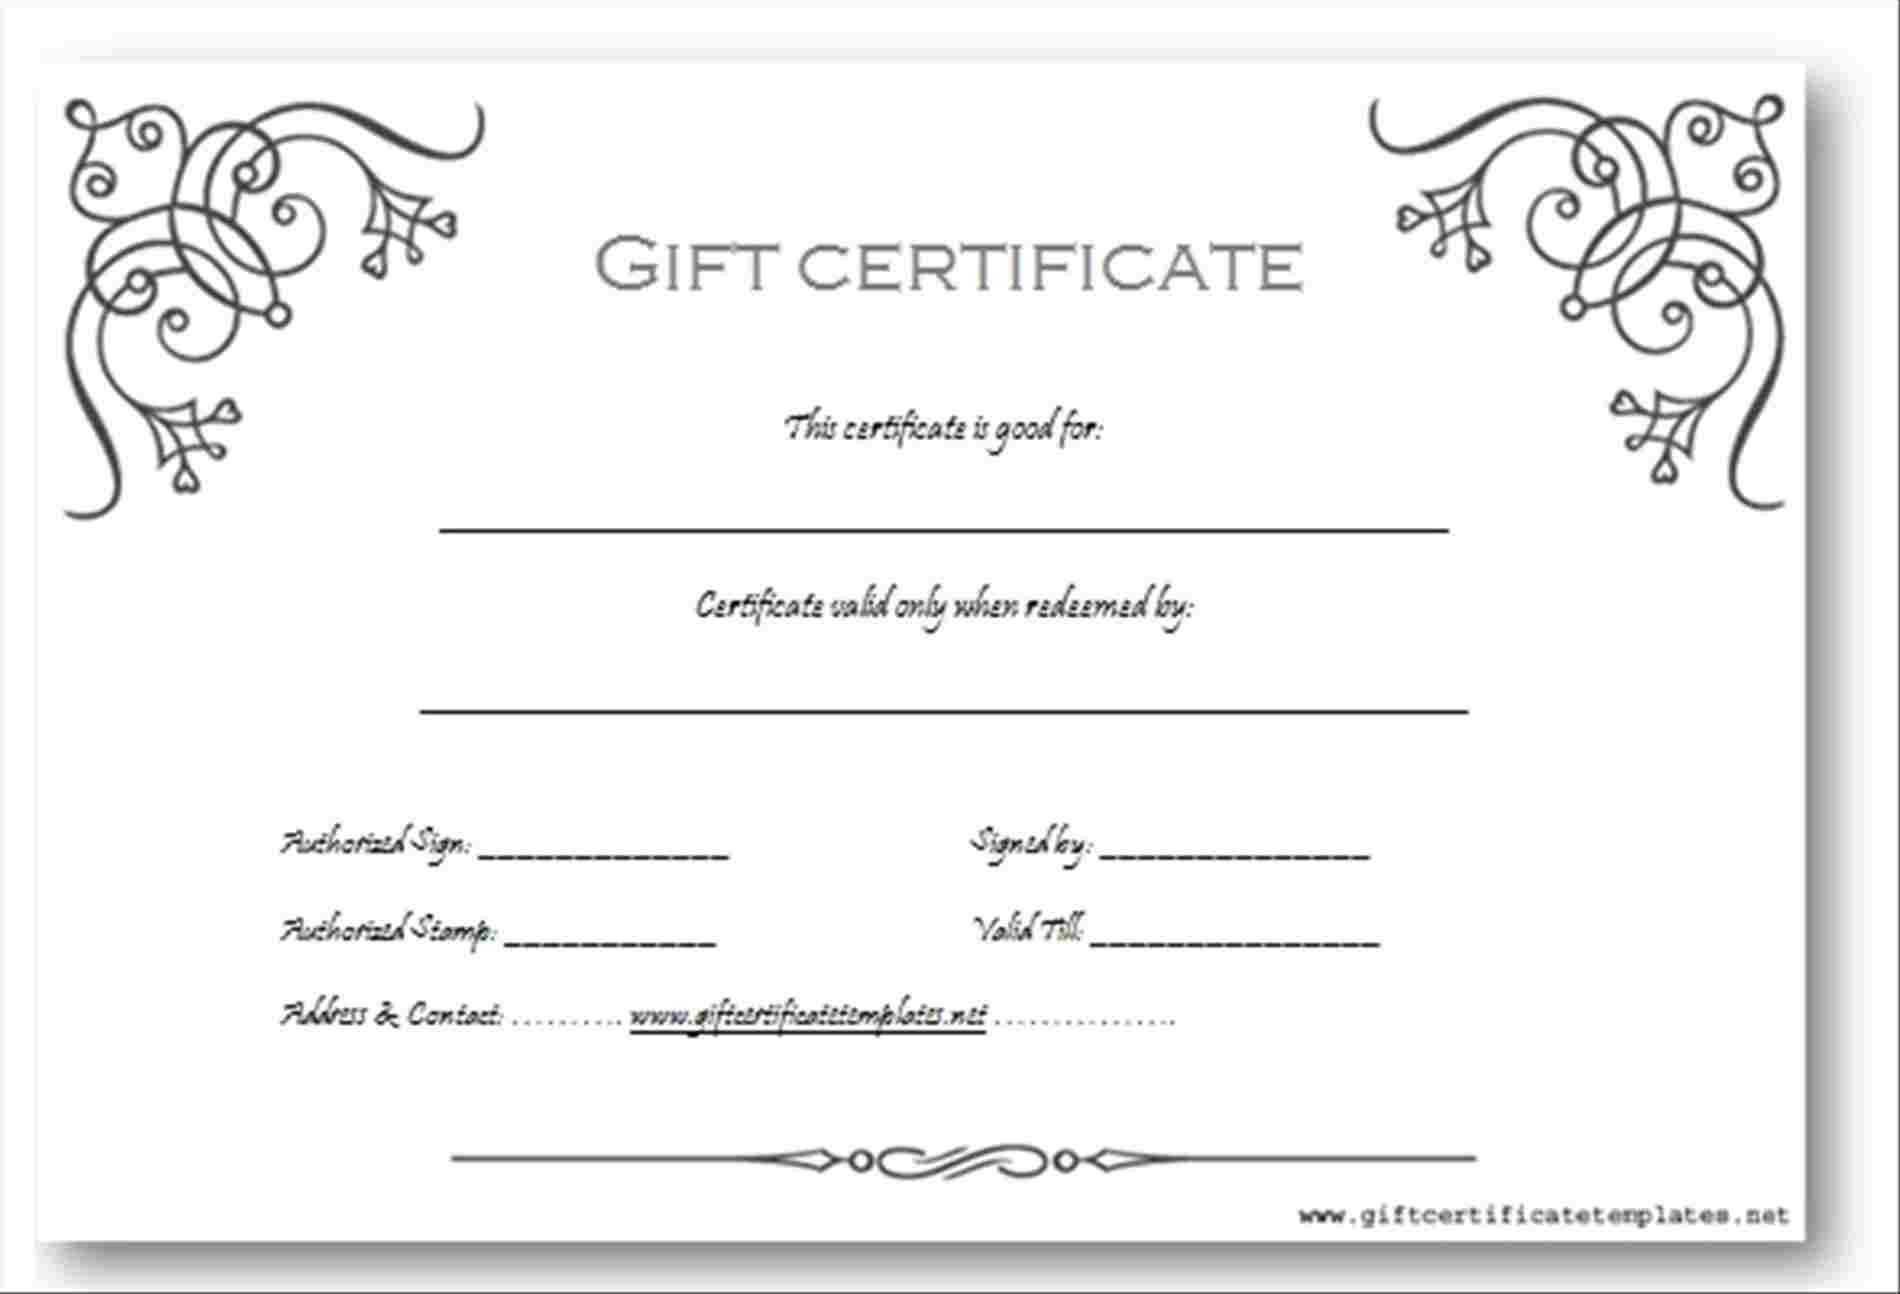 007 Photographer Gift Certificate Template Free Photography In Free Photography Gift Certificate Template